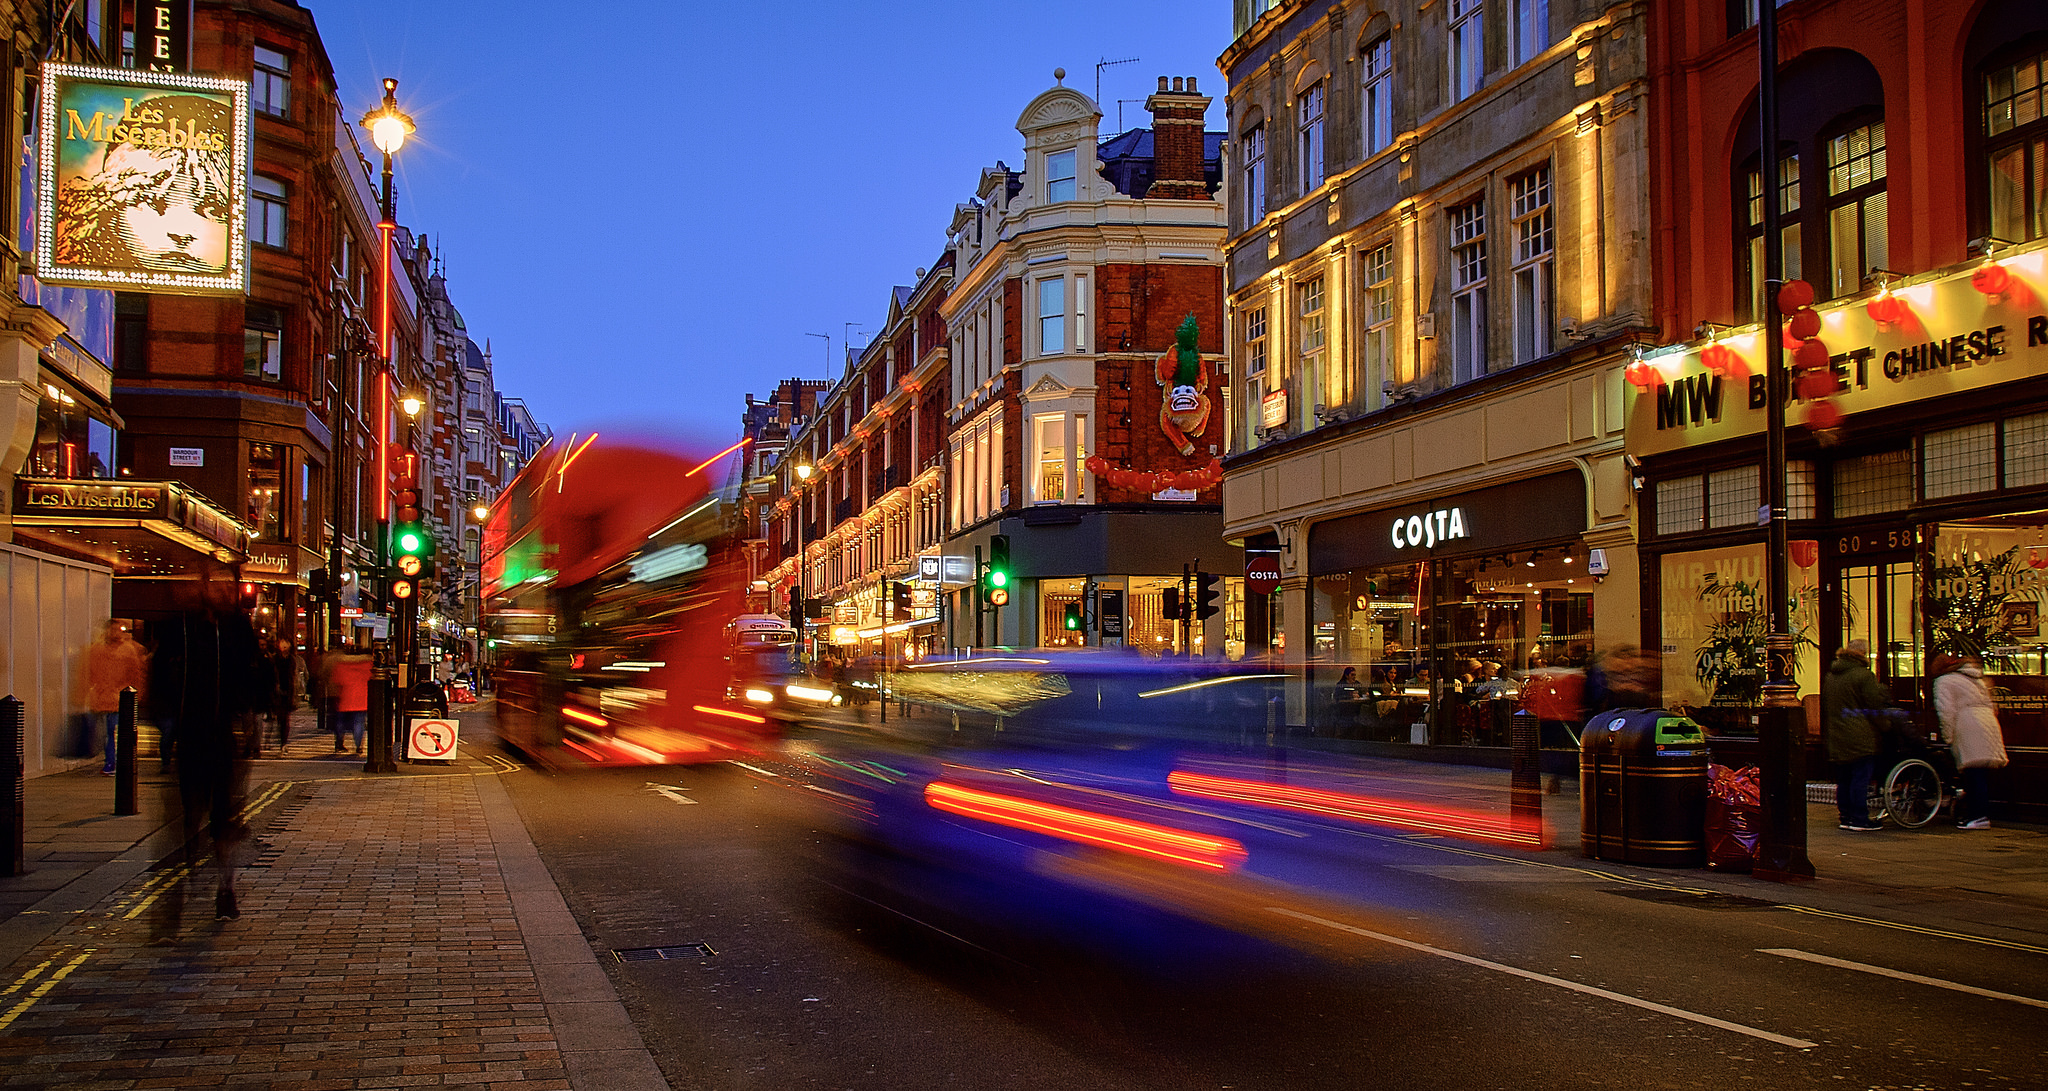 "London" by Pedro Szekely is licenced underAttribution-ShareAlike 2.0 Generic (CC BY-SA 2.0)